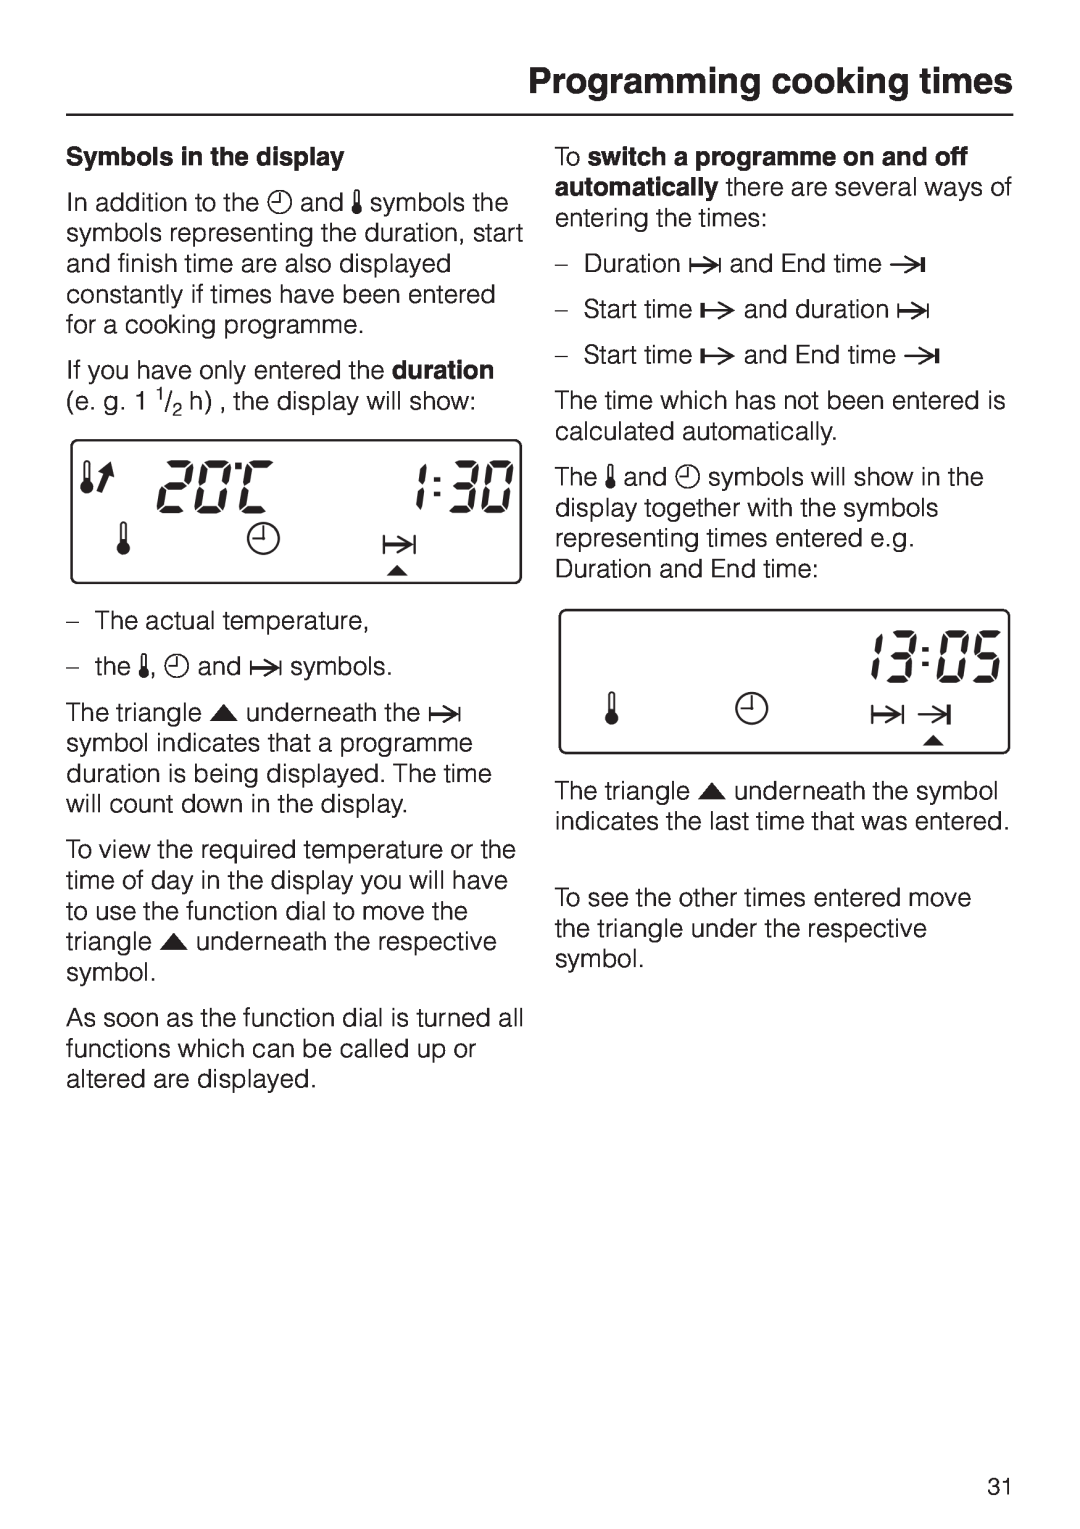 Miele H334B, H 344-2 B manual Symbols in the display, Programming cooking times 